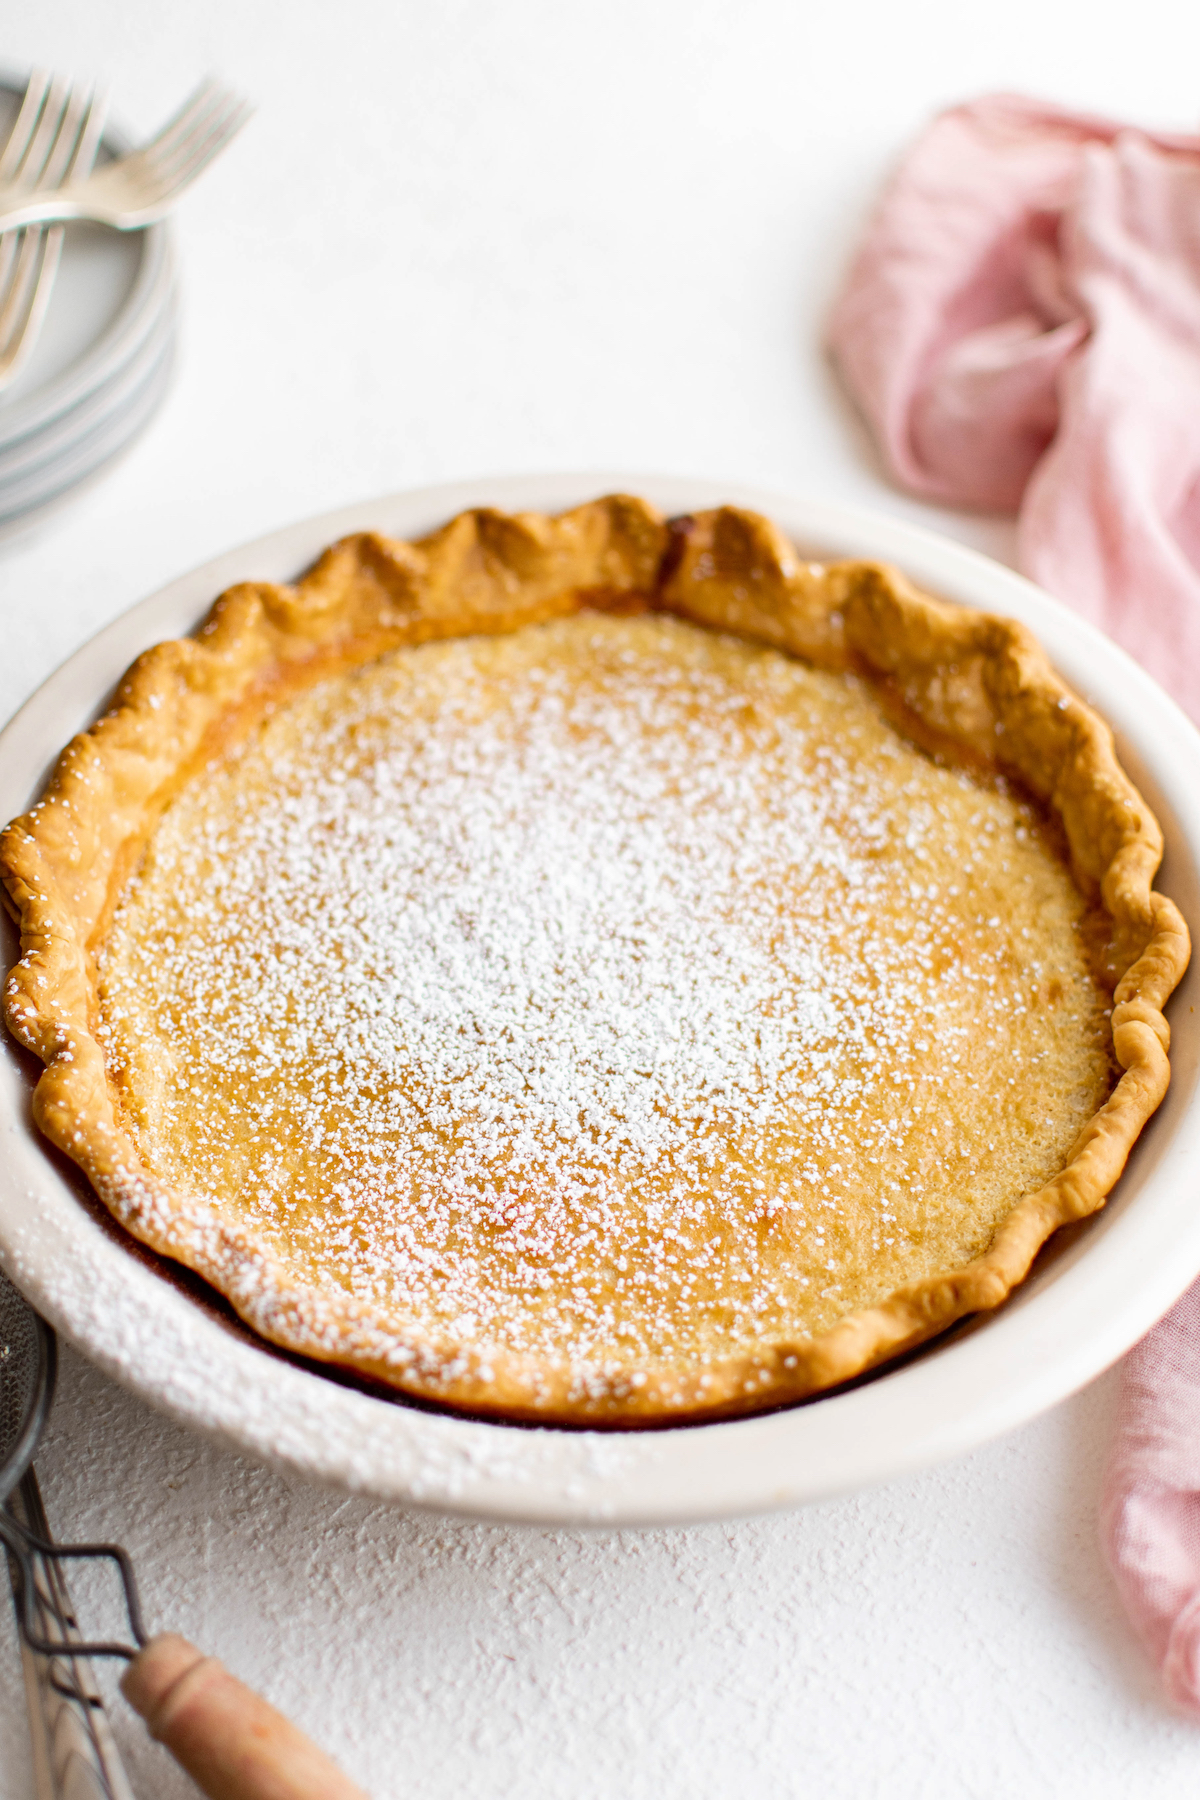 A homemade pie dusted with powdered sugar.